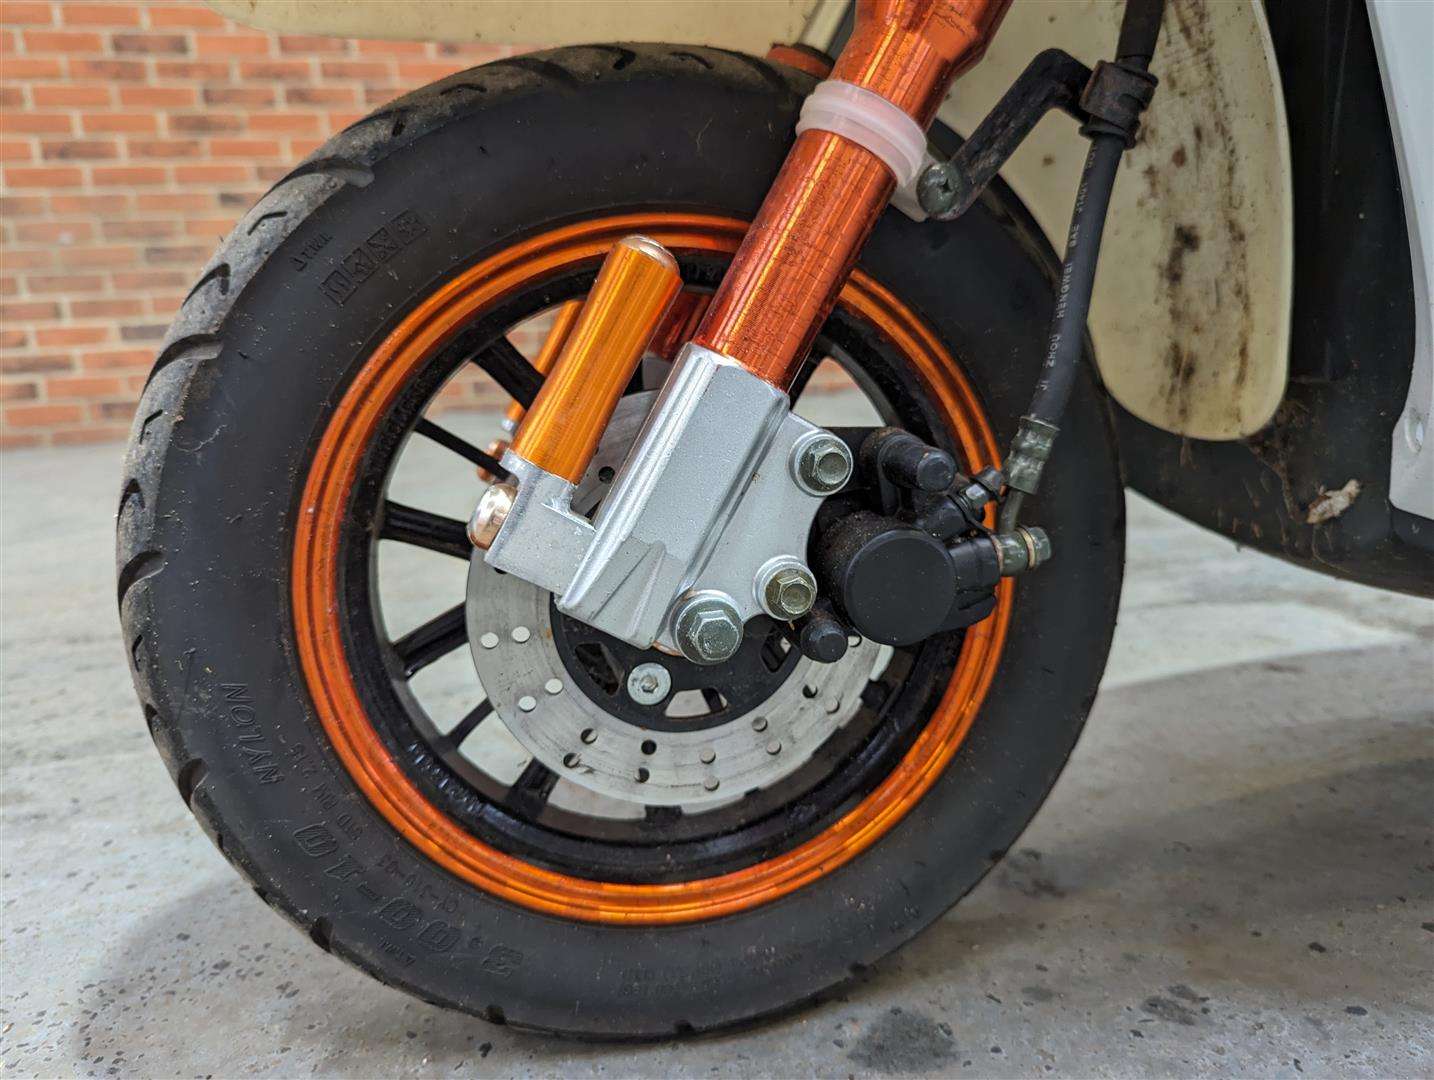 <p>3 Wheel Mobility Scooter</p>